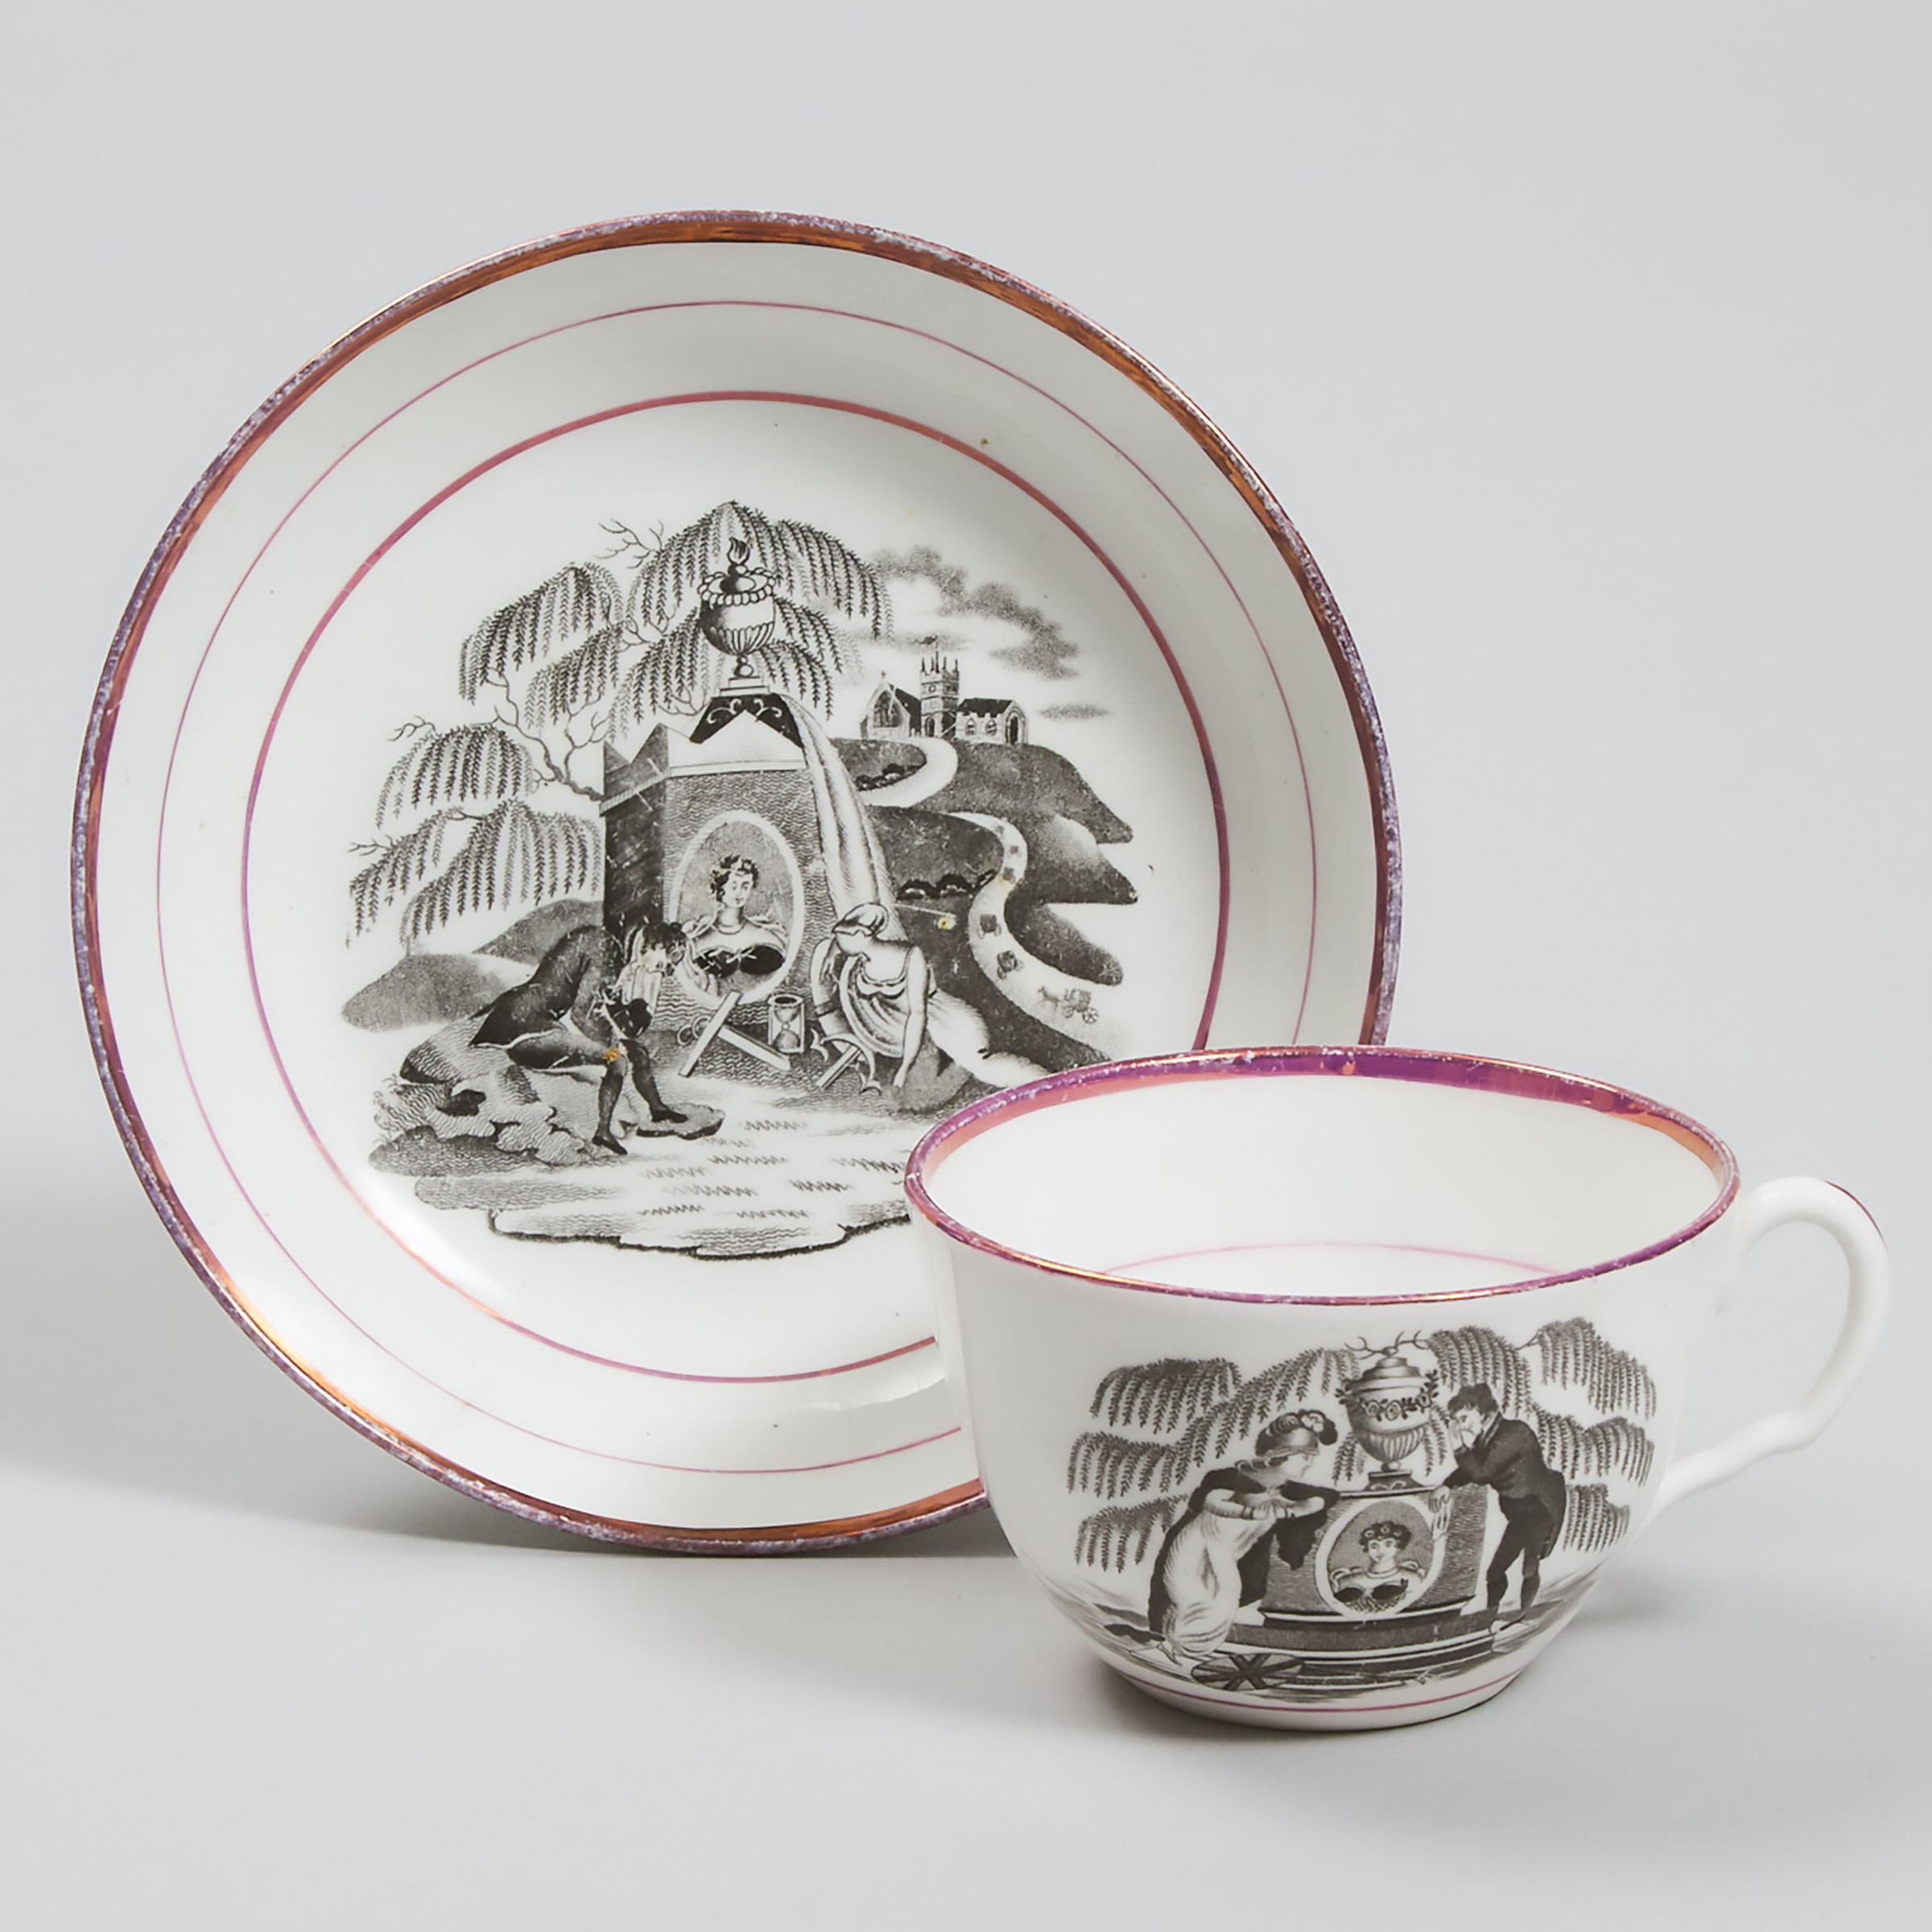 Sunderland Lustre Transferware Teacup and Saucer Commemorating the Death of Princess Charlotte of Wales, 1817 